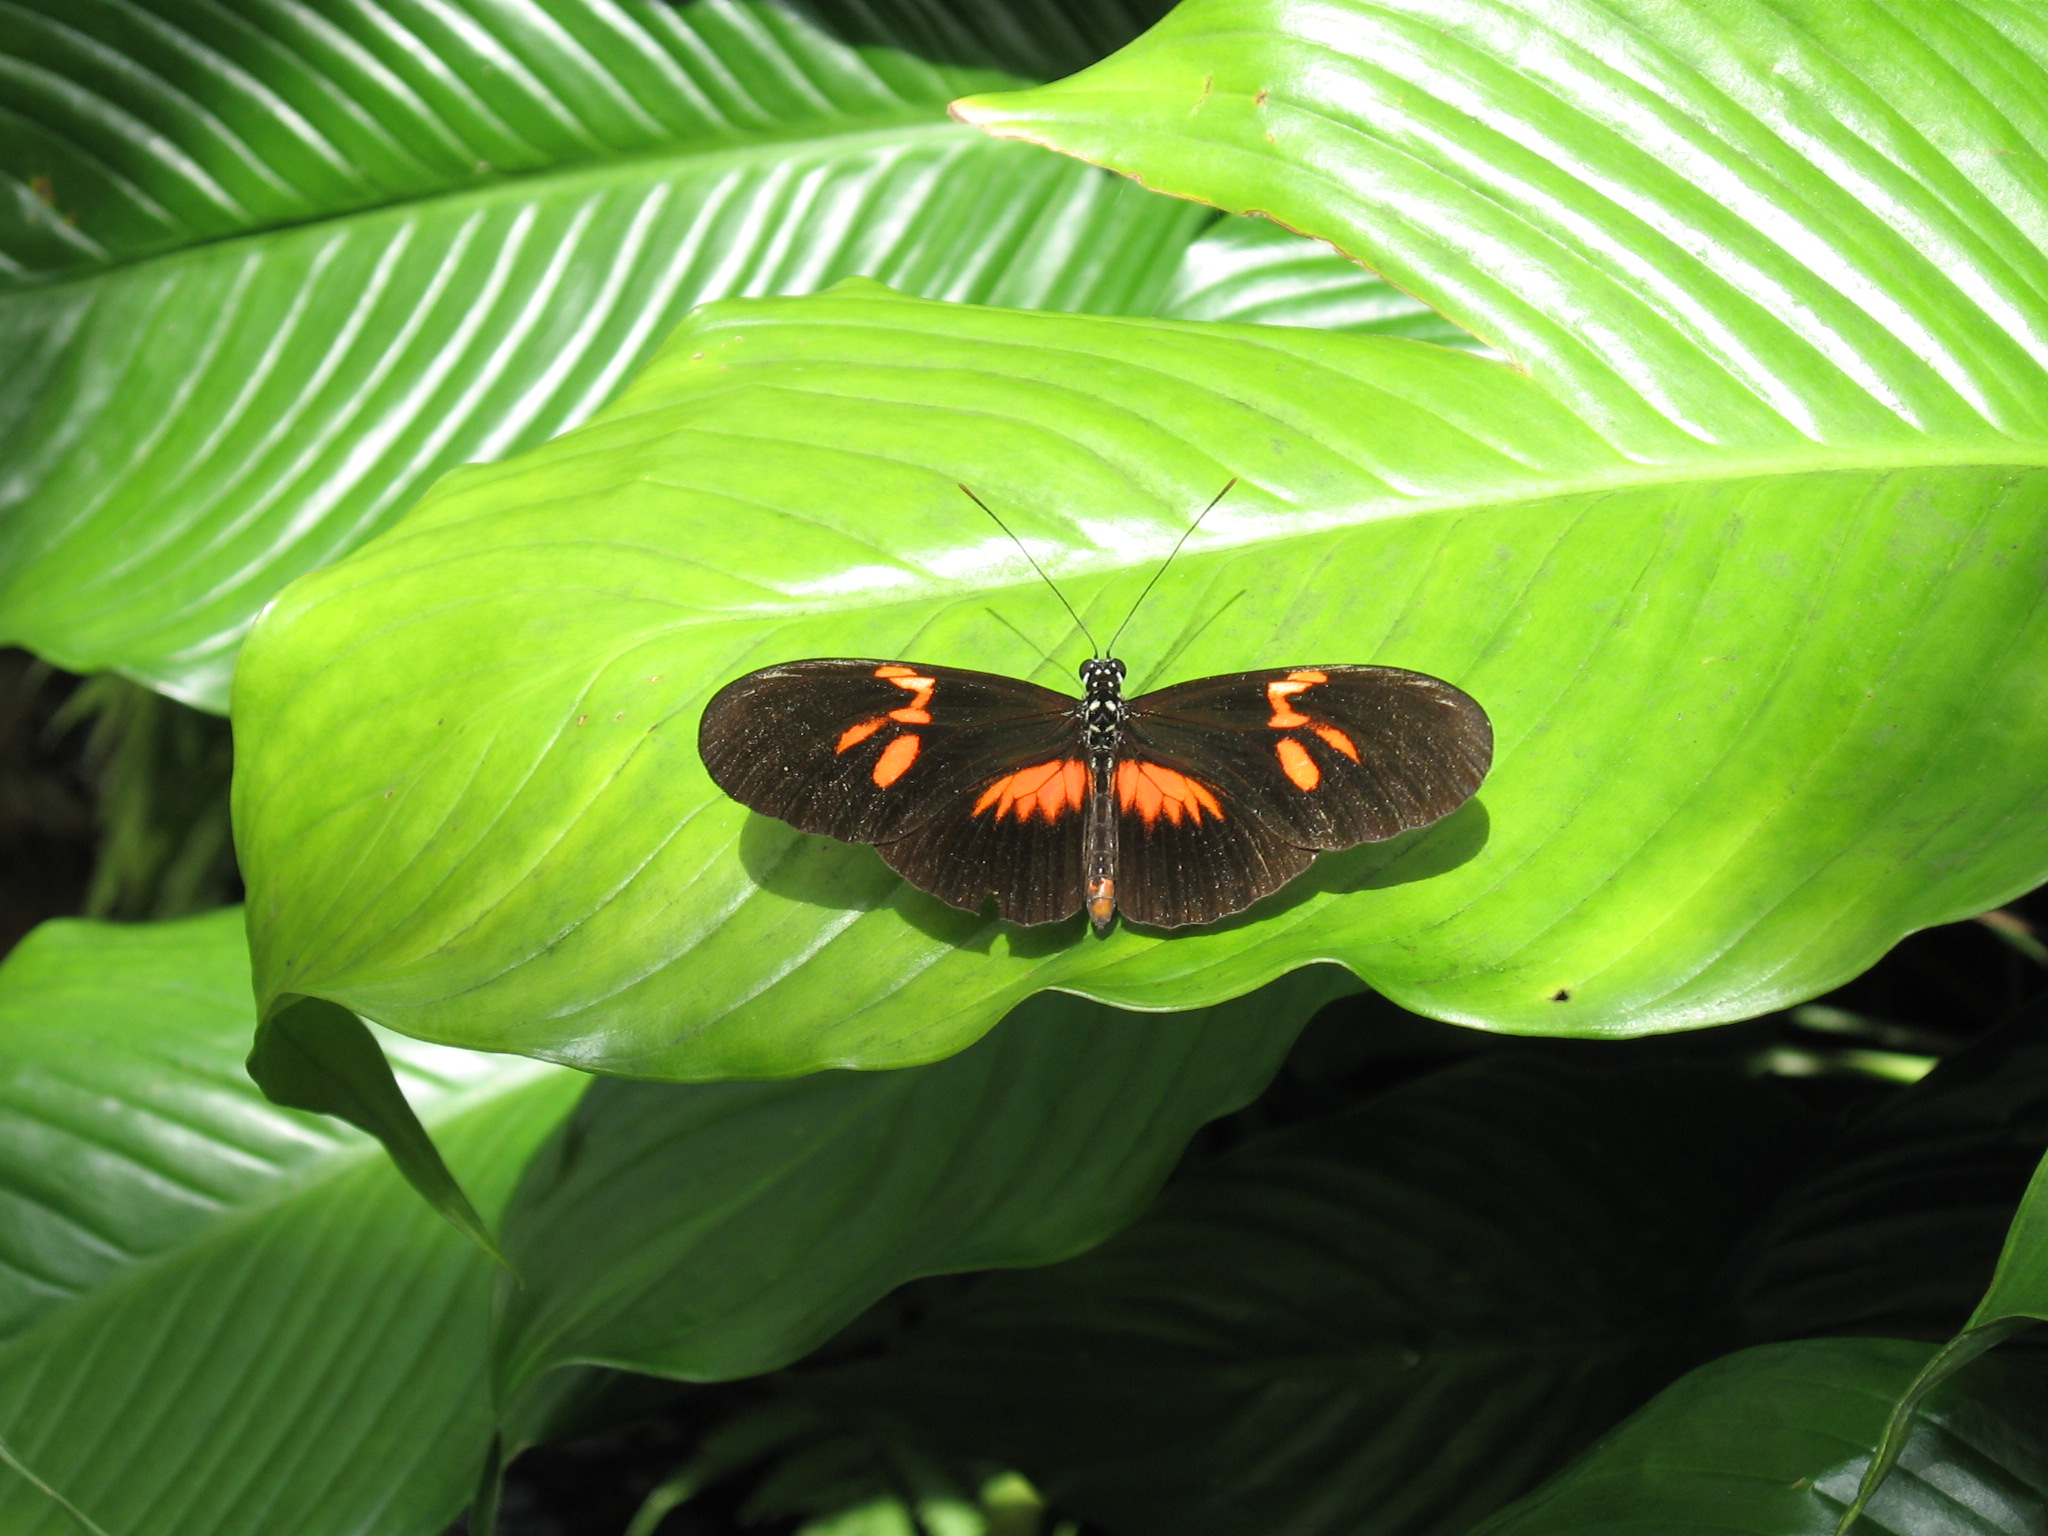 A wonderful surprise in Germany at the Insel Mainau Butterfly House (Konstanz)